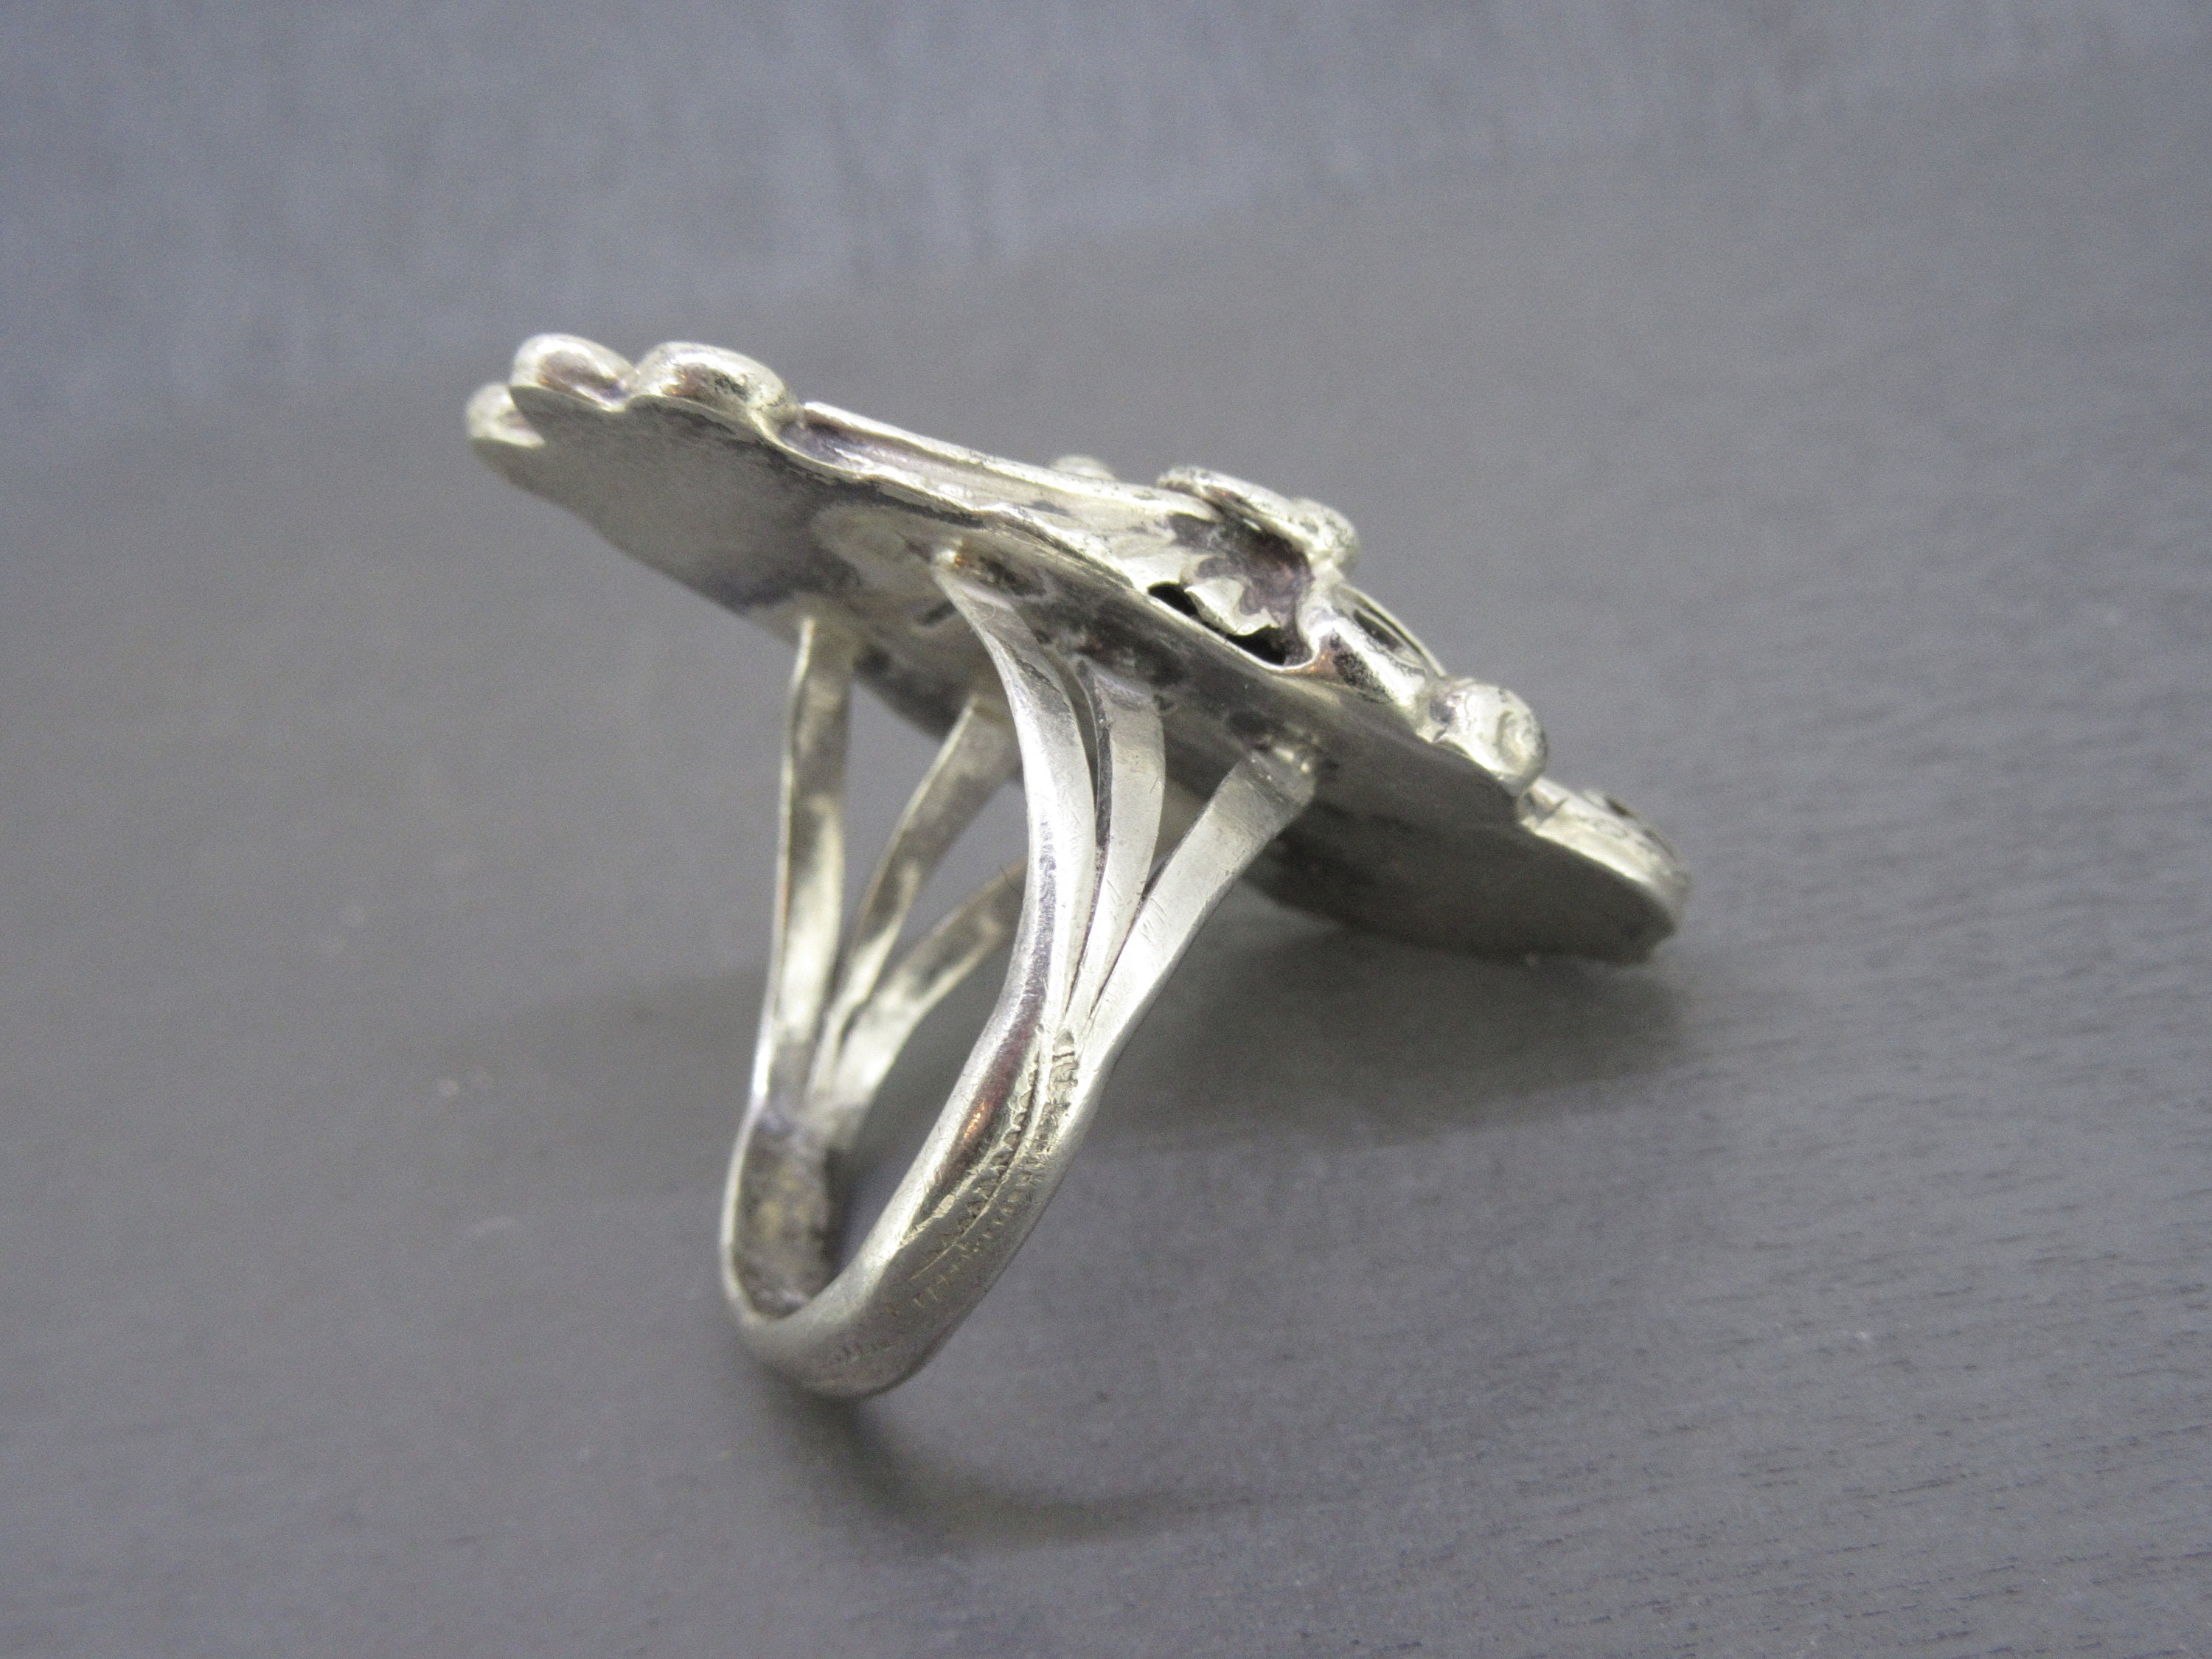 Huge Vintage Sterling Silver Ring With Abstract Leaf and Swirl